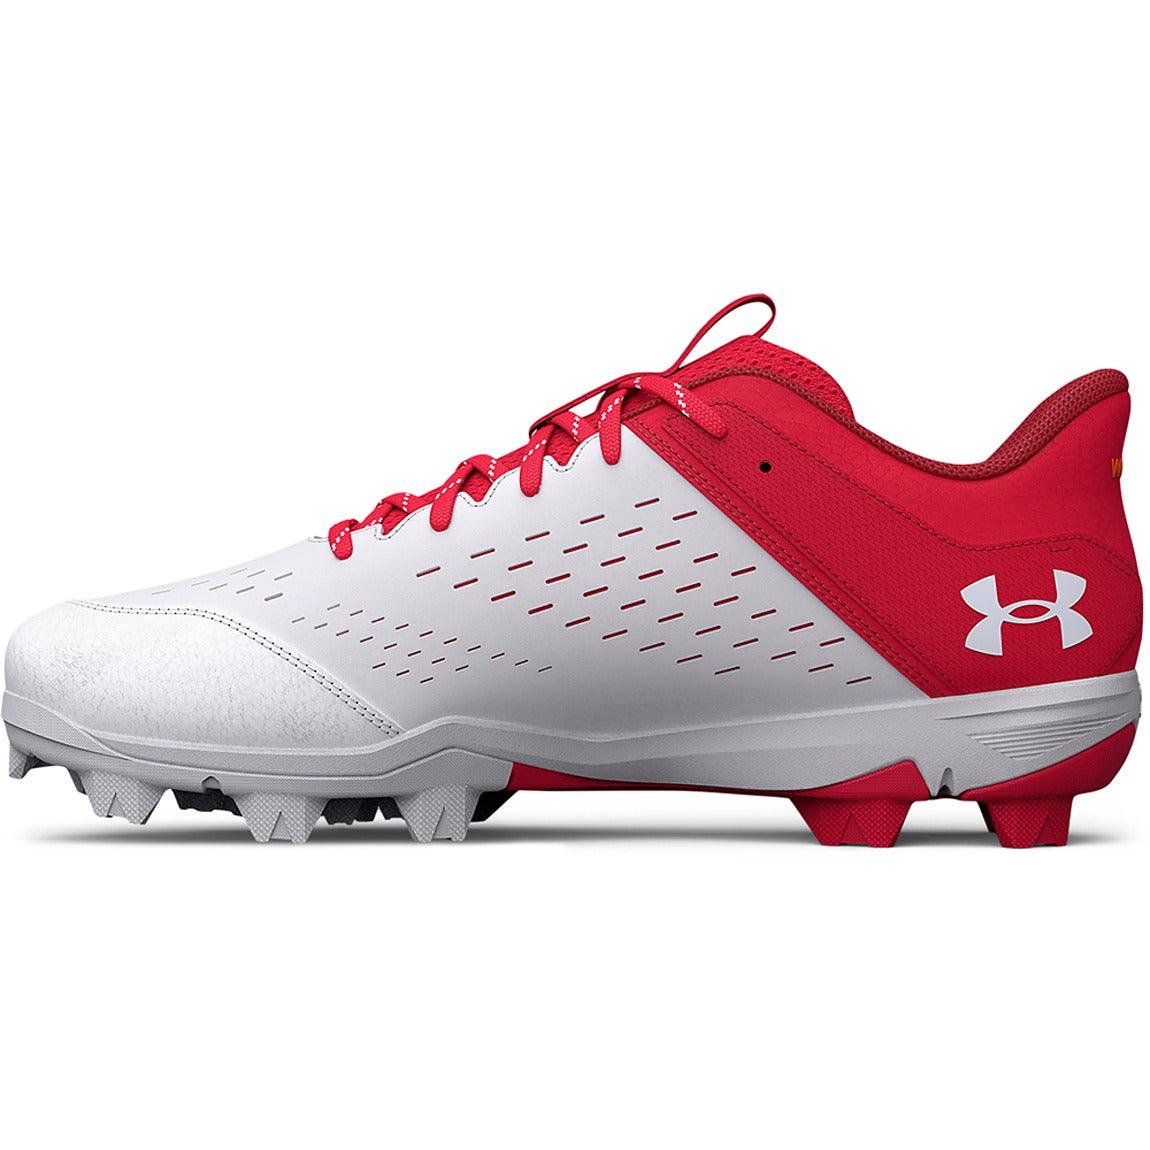 Under Armour Leadoff Low RM Baseball Cleats - Sports Excellence